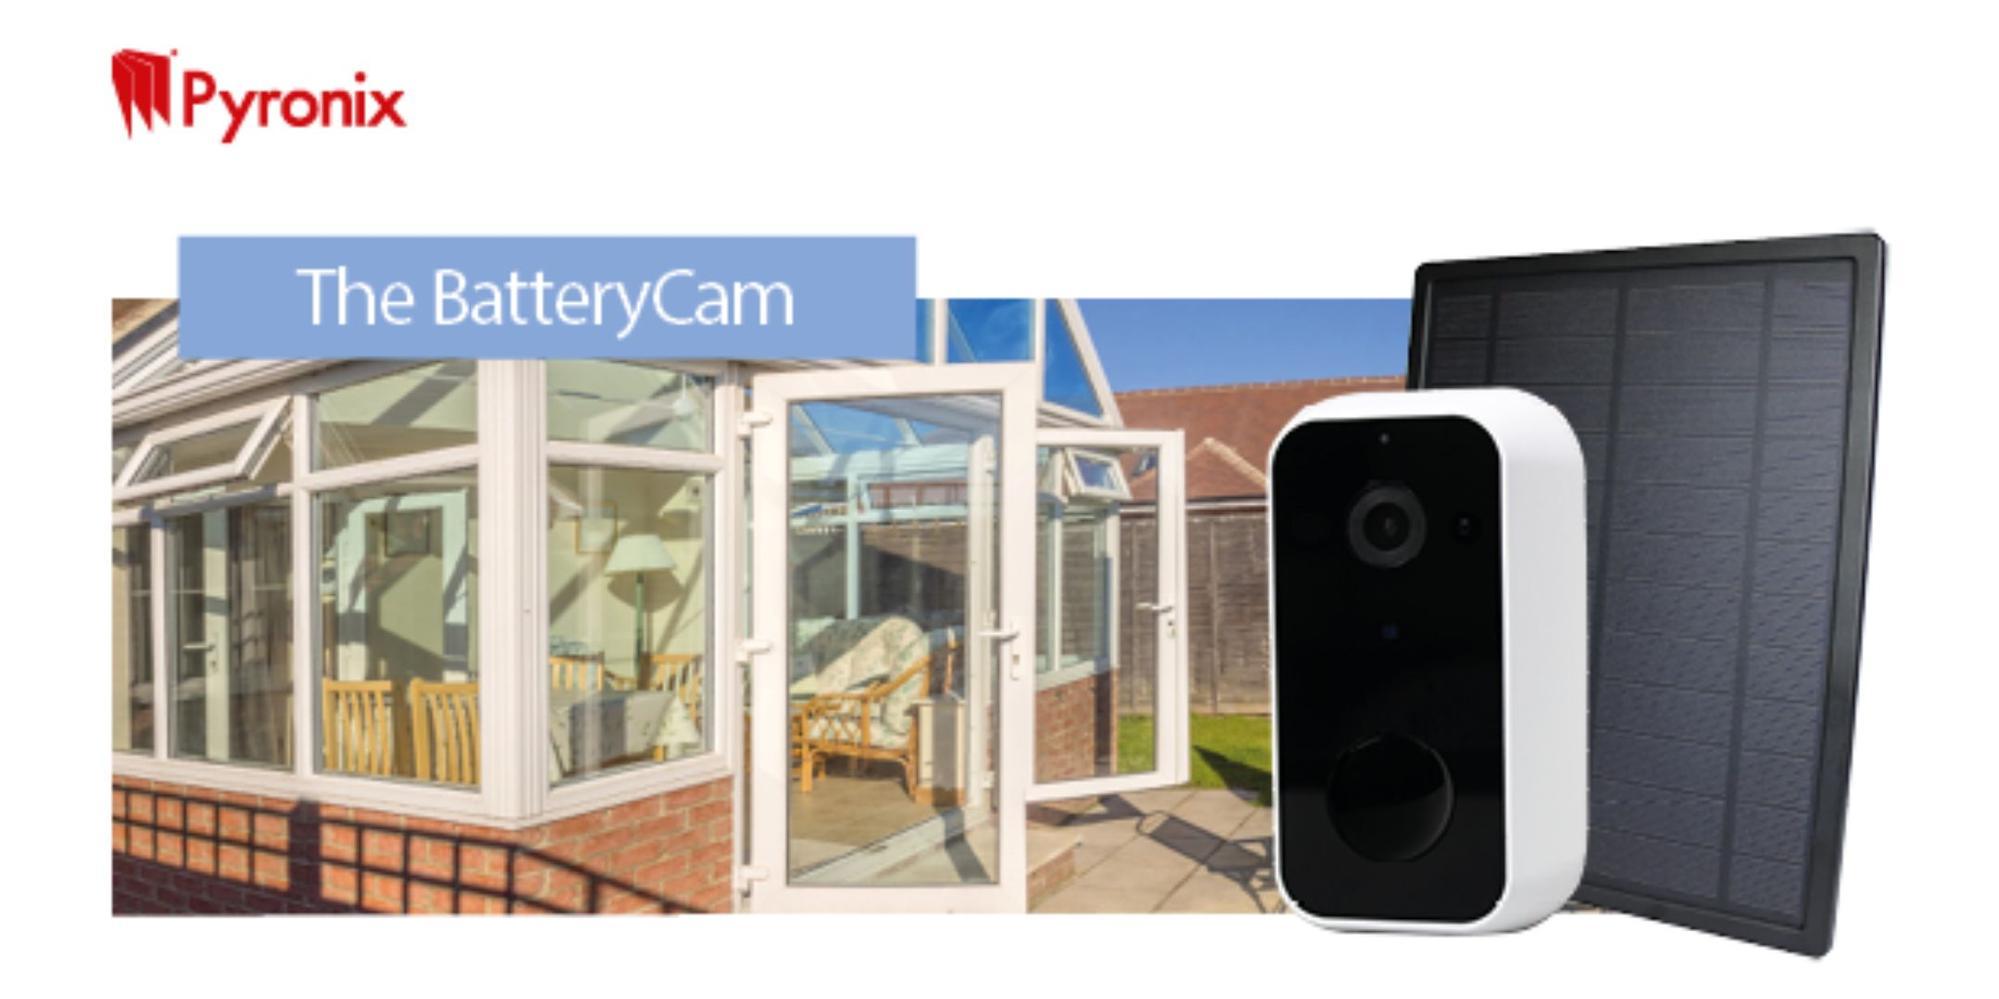 Pyronix expands SmartHome range with the BatteryCam